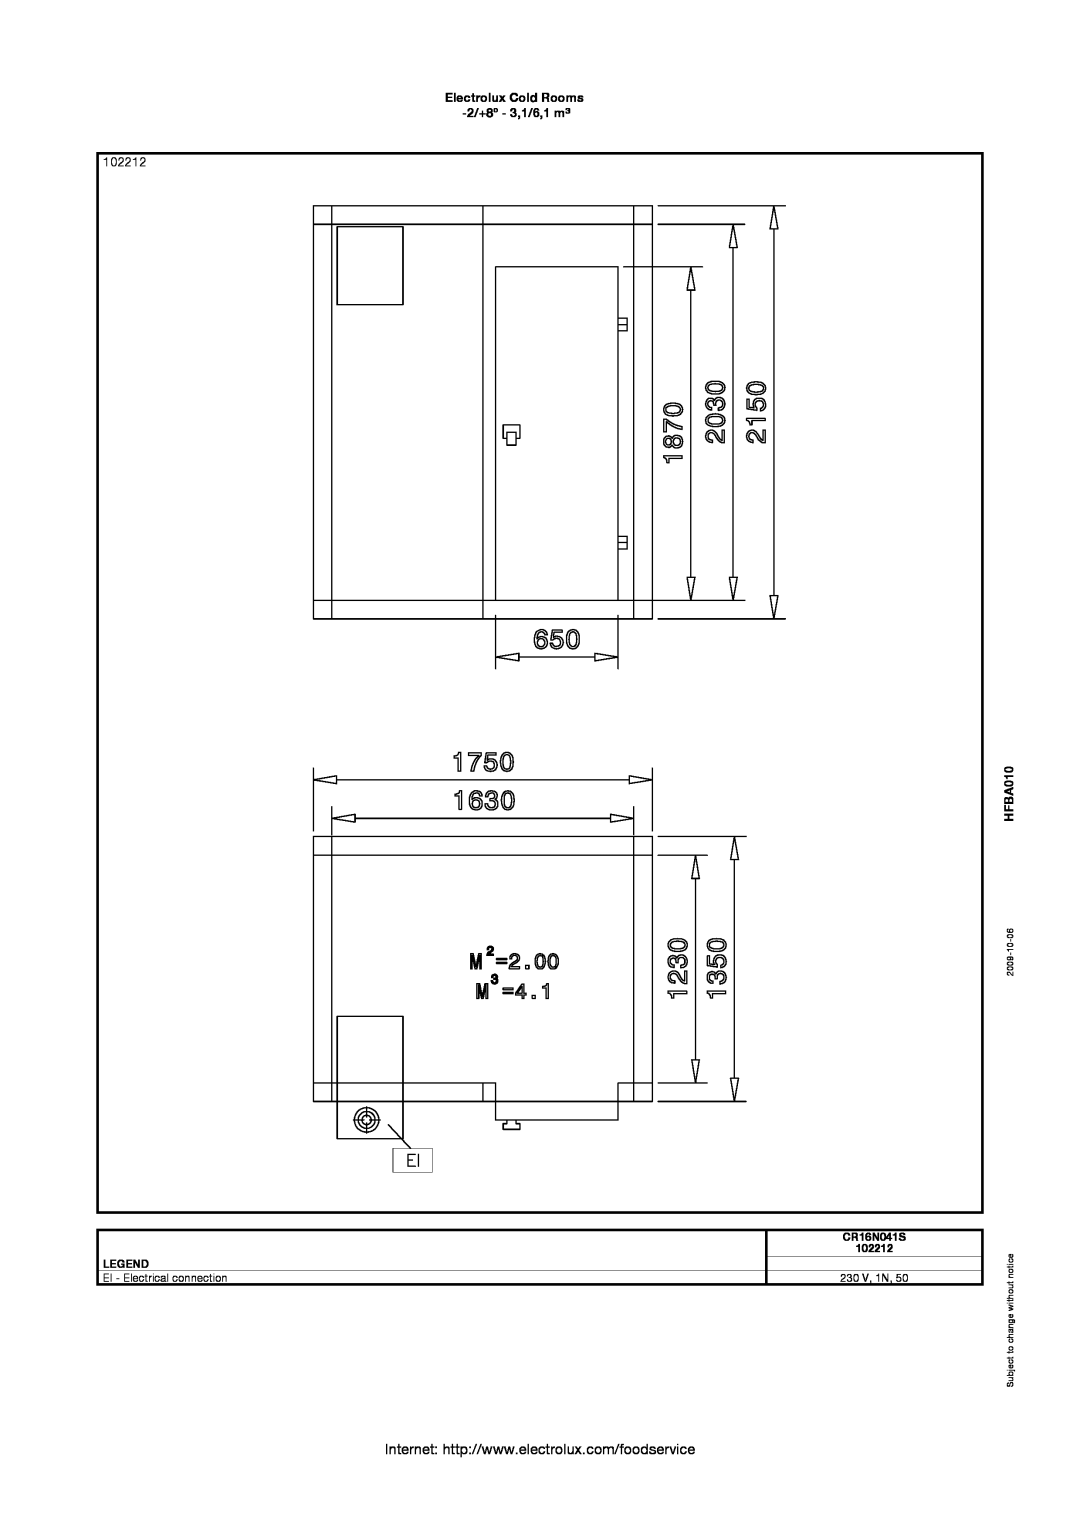 Electrolux CR12N031S 102212, Electrolux Cold Rooms -2/+8º - 3,1/6,1 m³, HFBA010, CR16N041S, EI - Electrical connection 